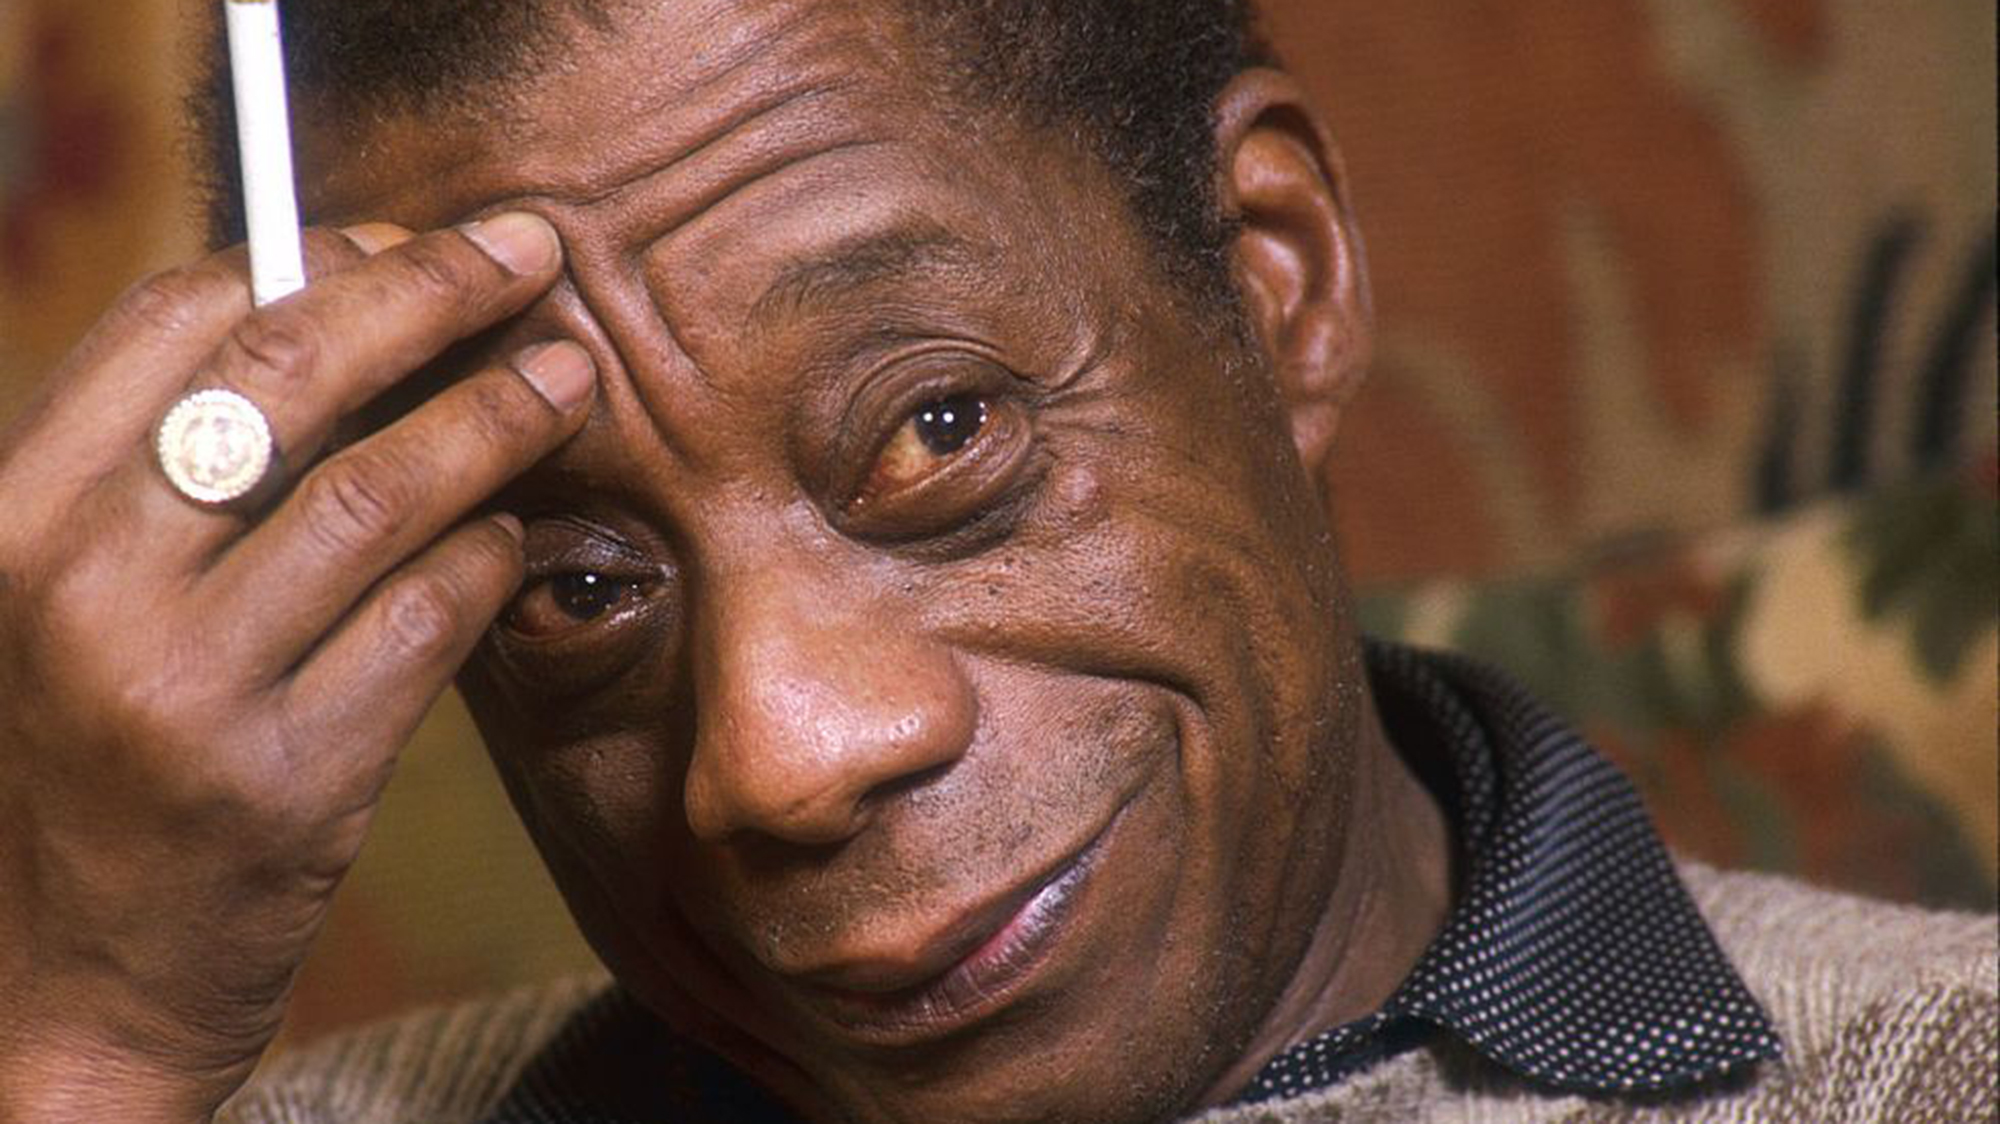 Watch a Never-Before-Aired James Baldwin Interview From 1979